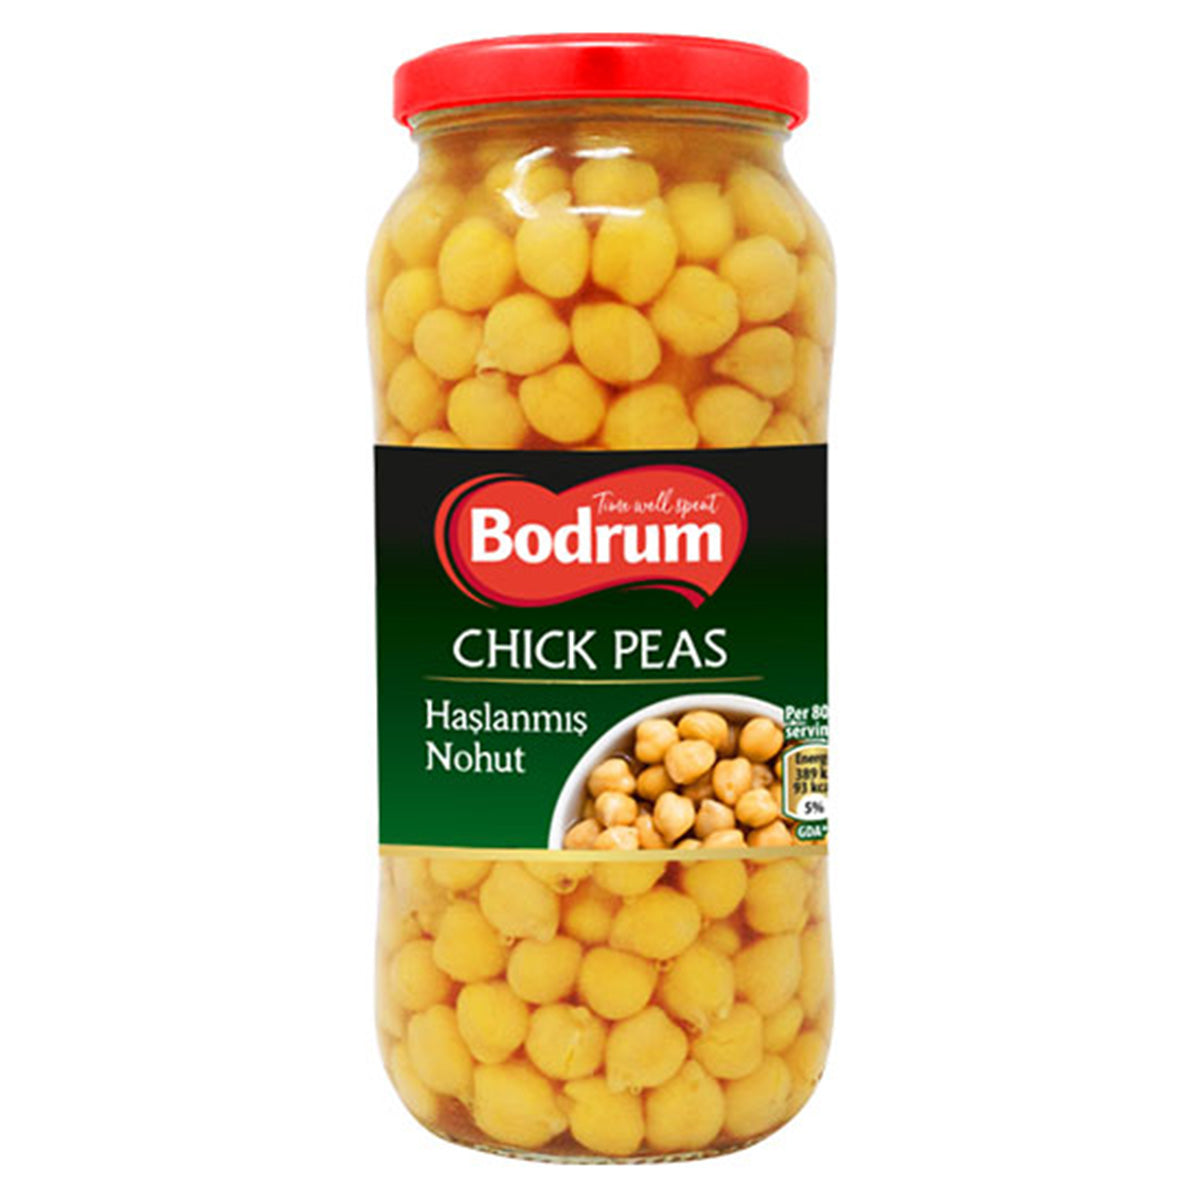 A Bodrum - Chick Peas in Jar - 540g on a white background.